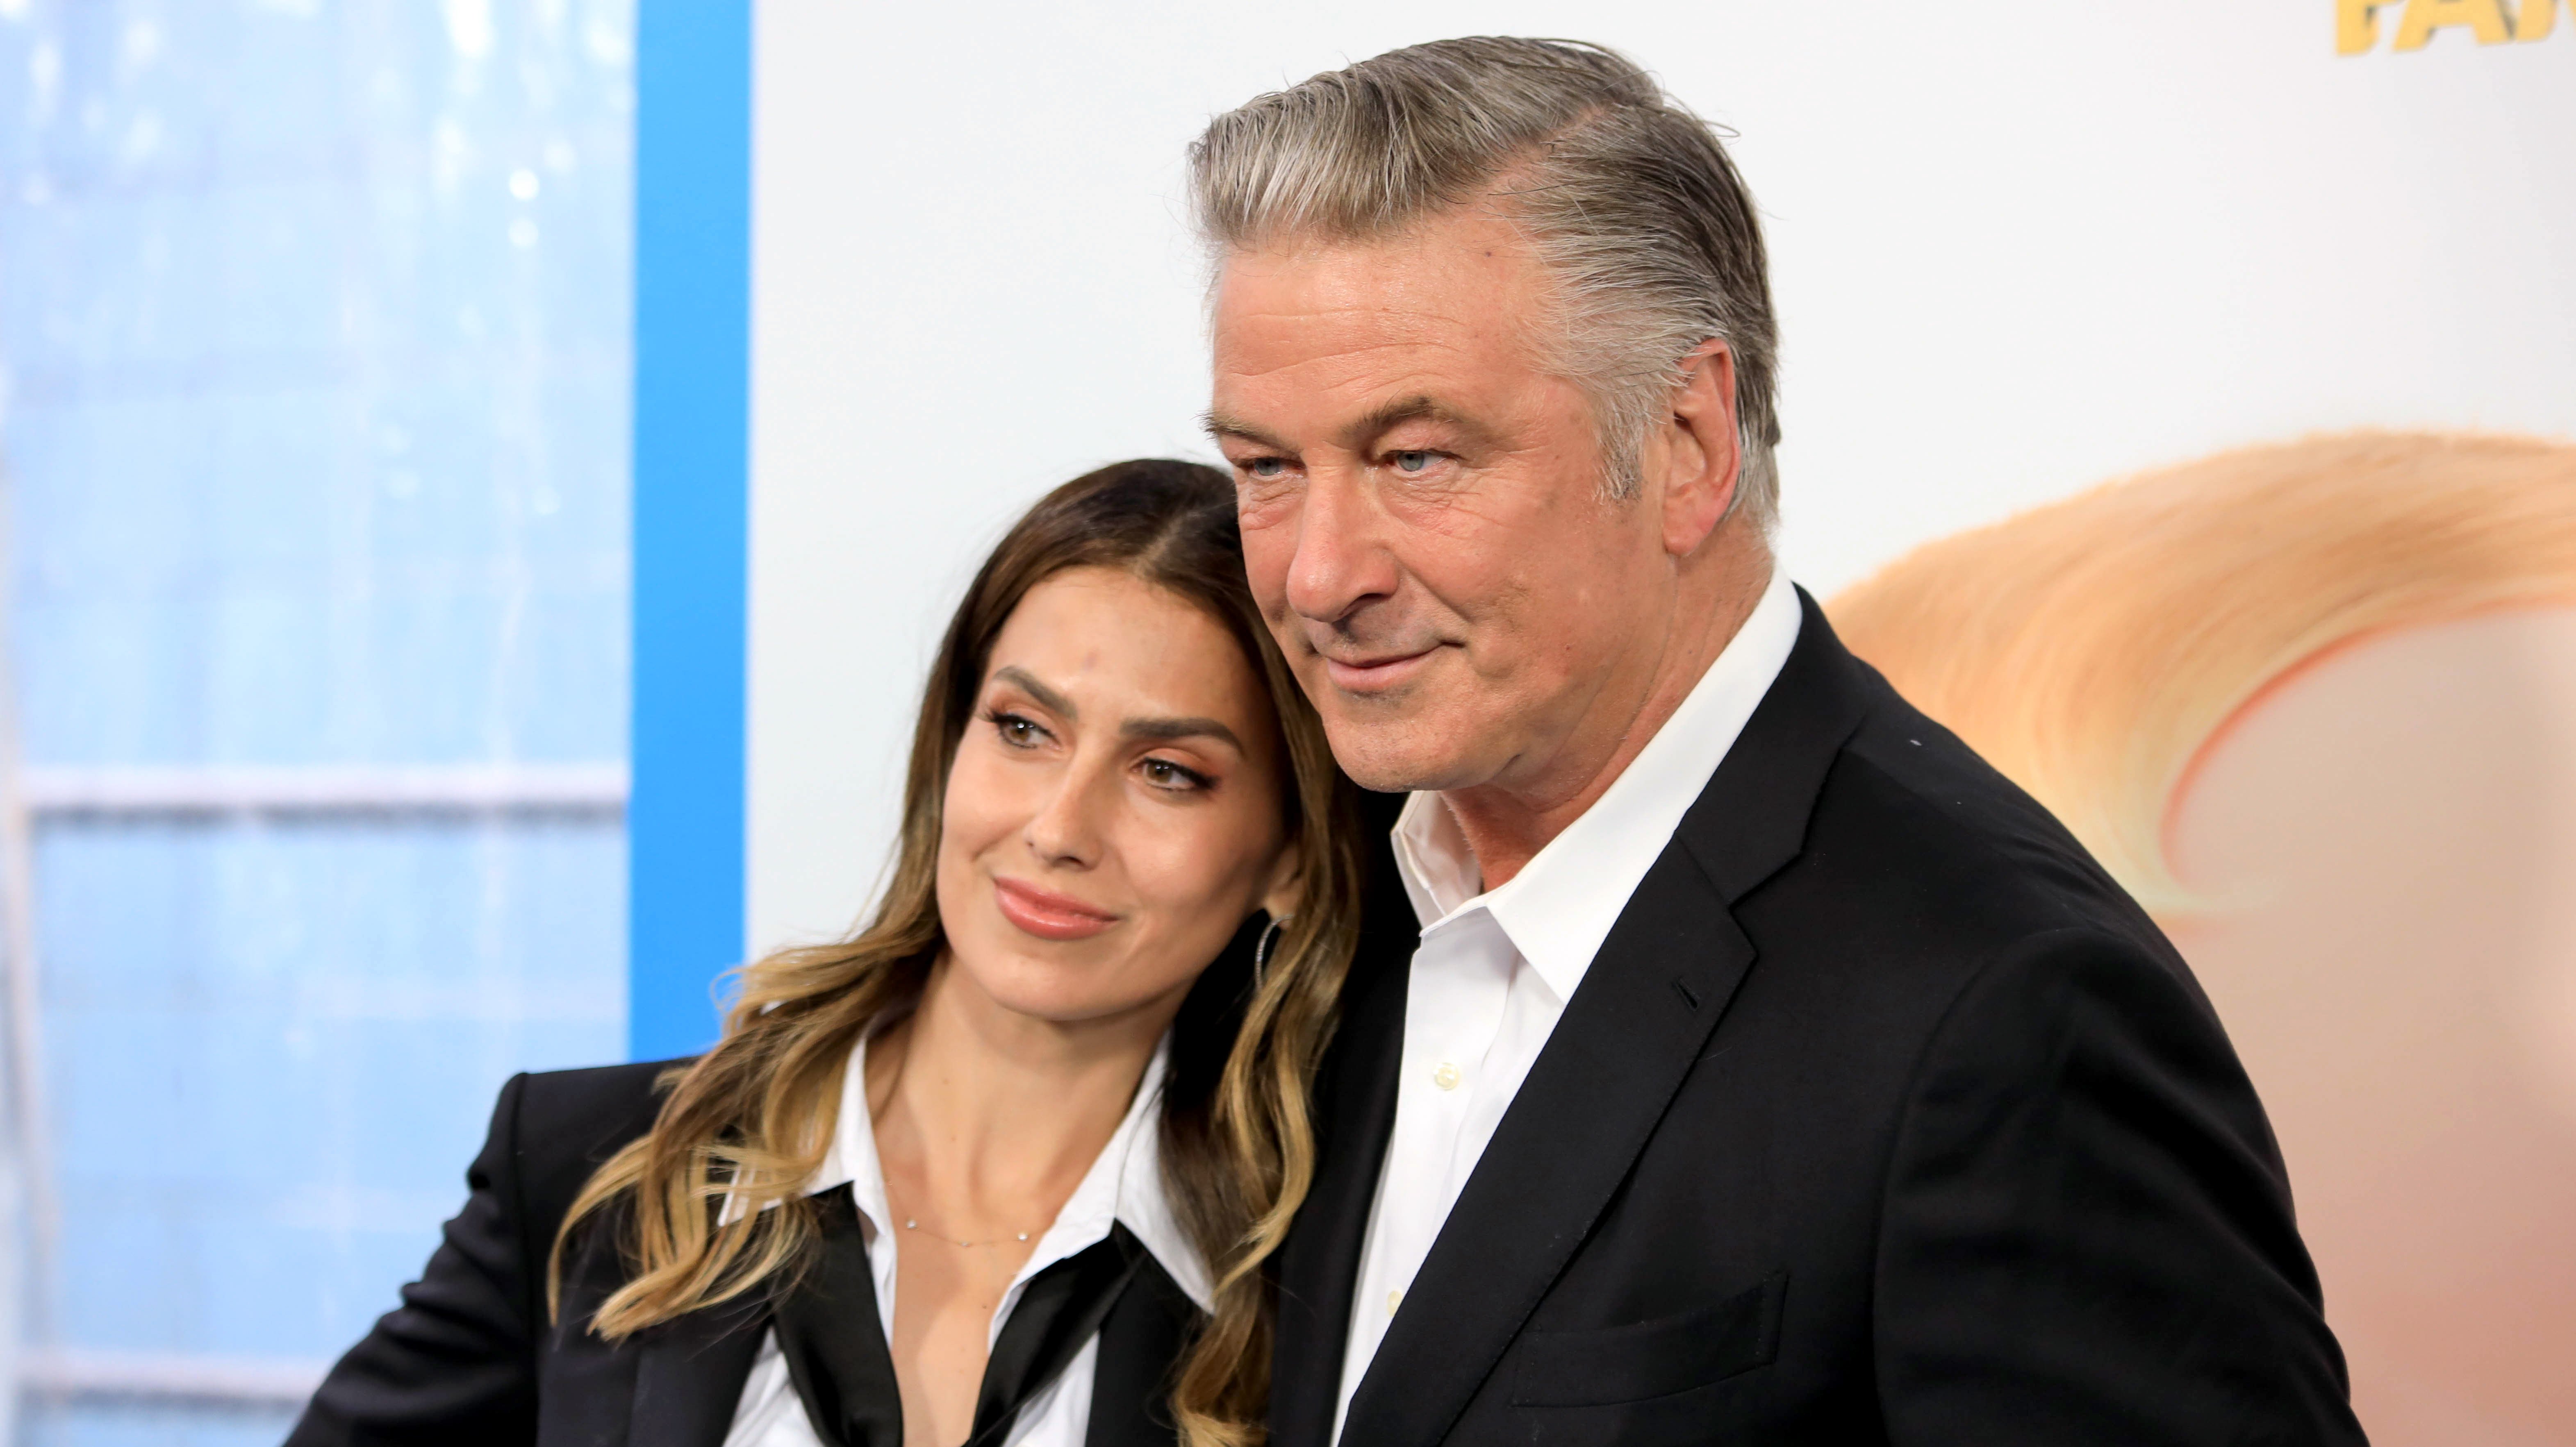 Hilaria Baldwin and Alec Baldwin attend "The Boss Baby: Family Business" Premiere at SVA Theater on June 22, 2021 in New York City. | Getty Images